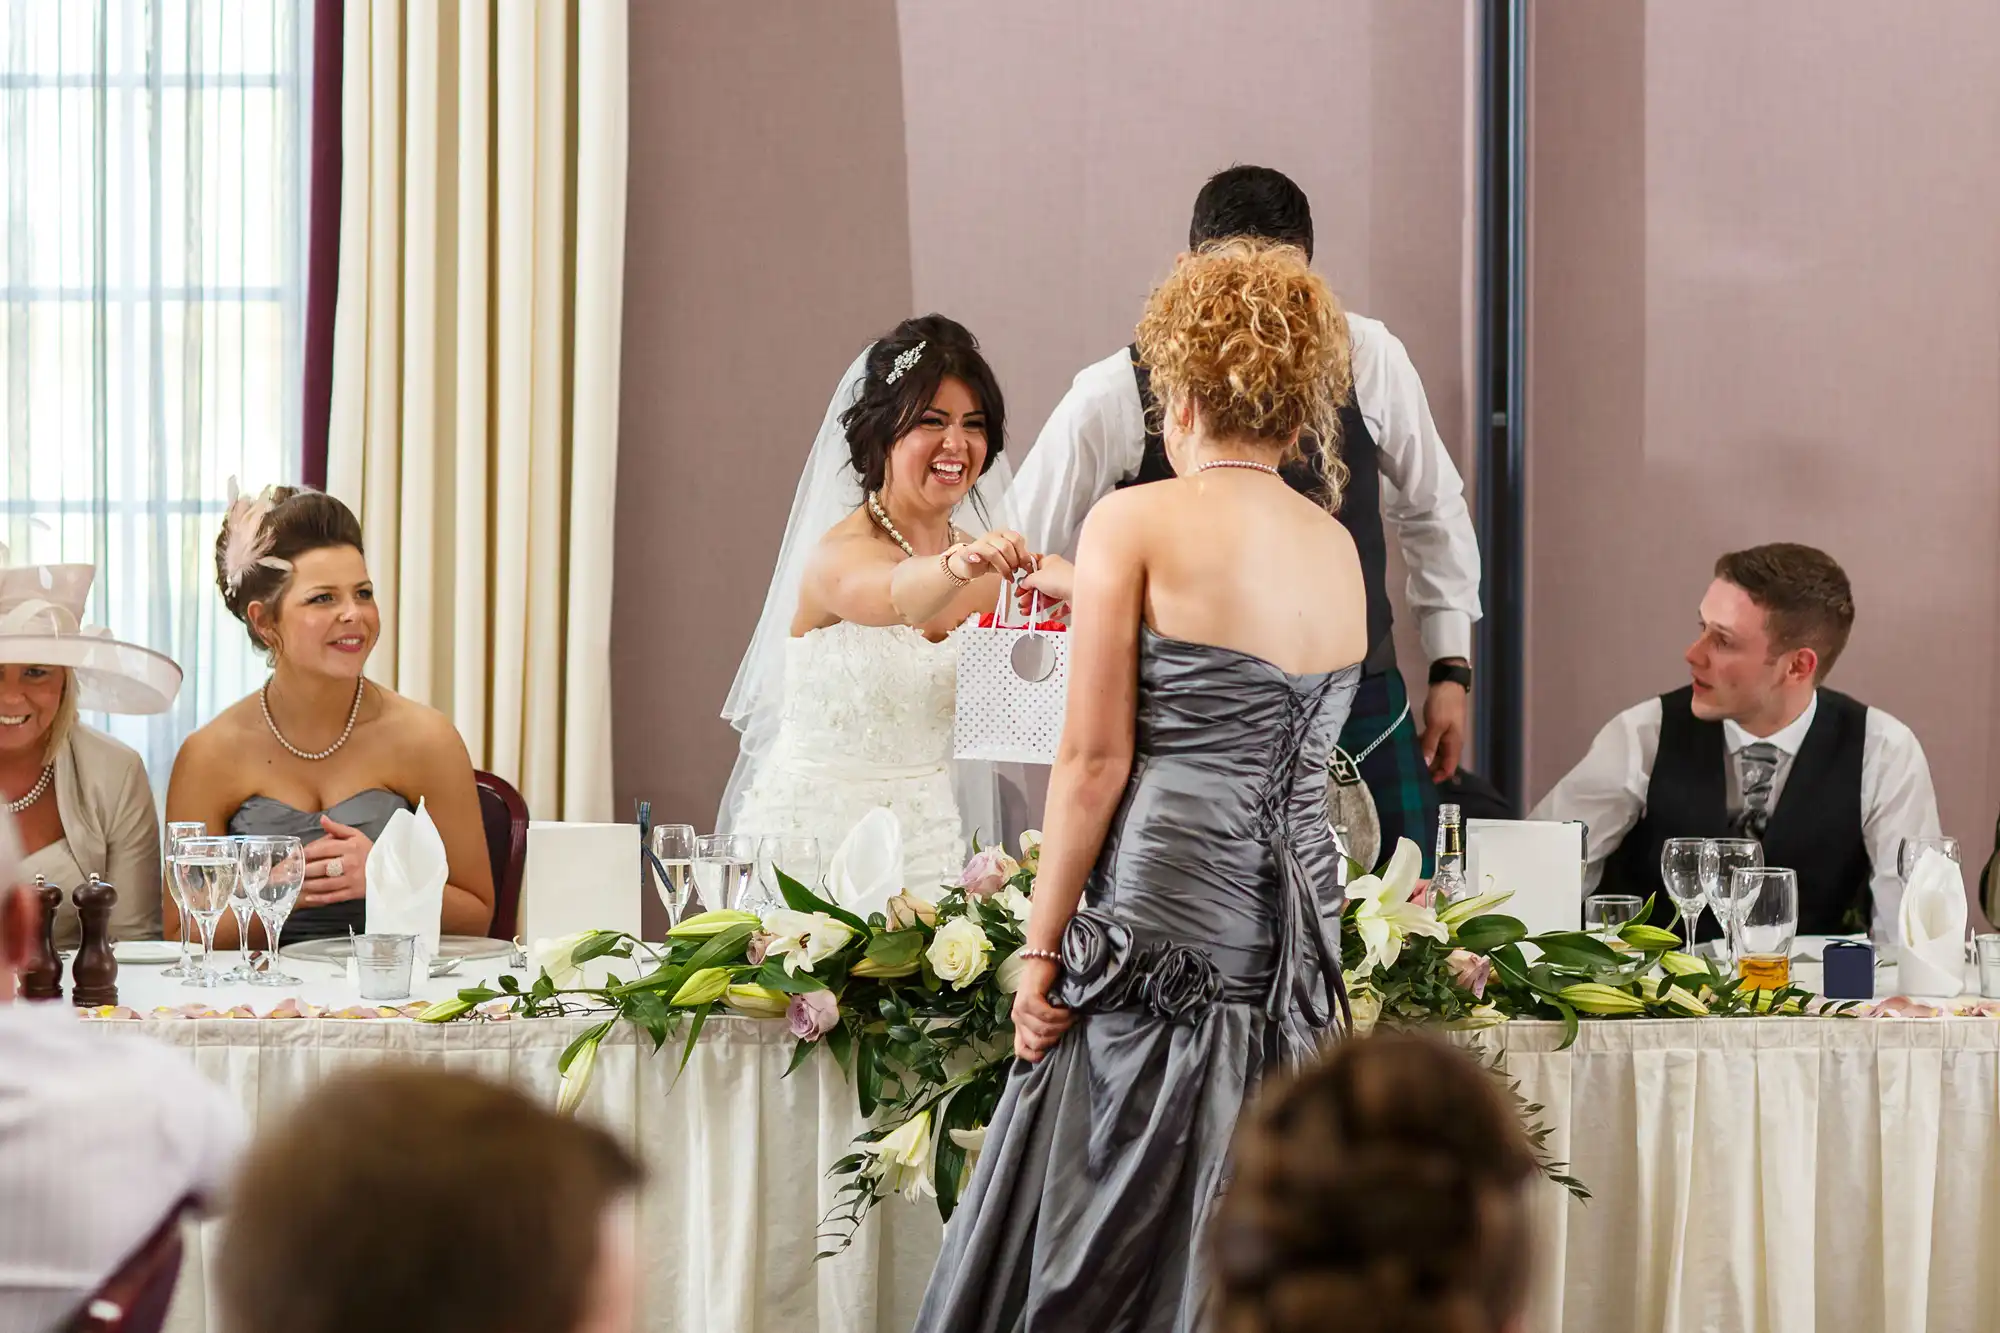 A bride in a white gown laughing and dancing with a guest at a wedding reception table surrounded by smiling guests.